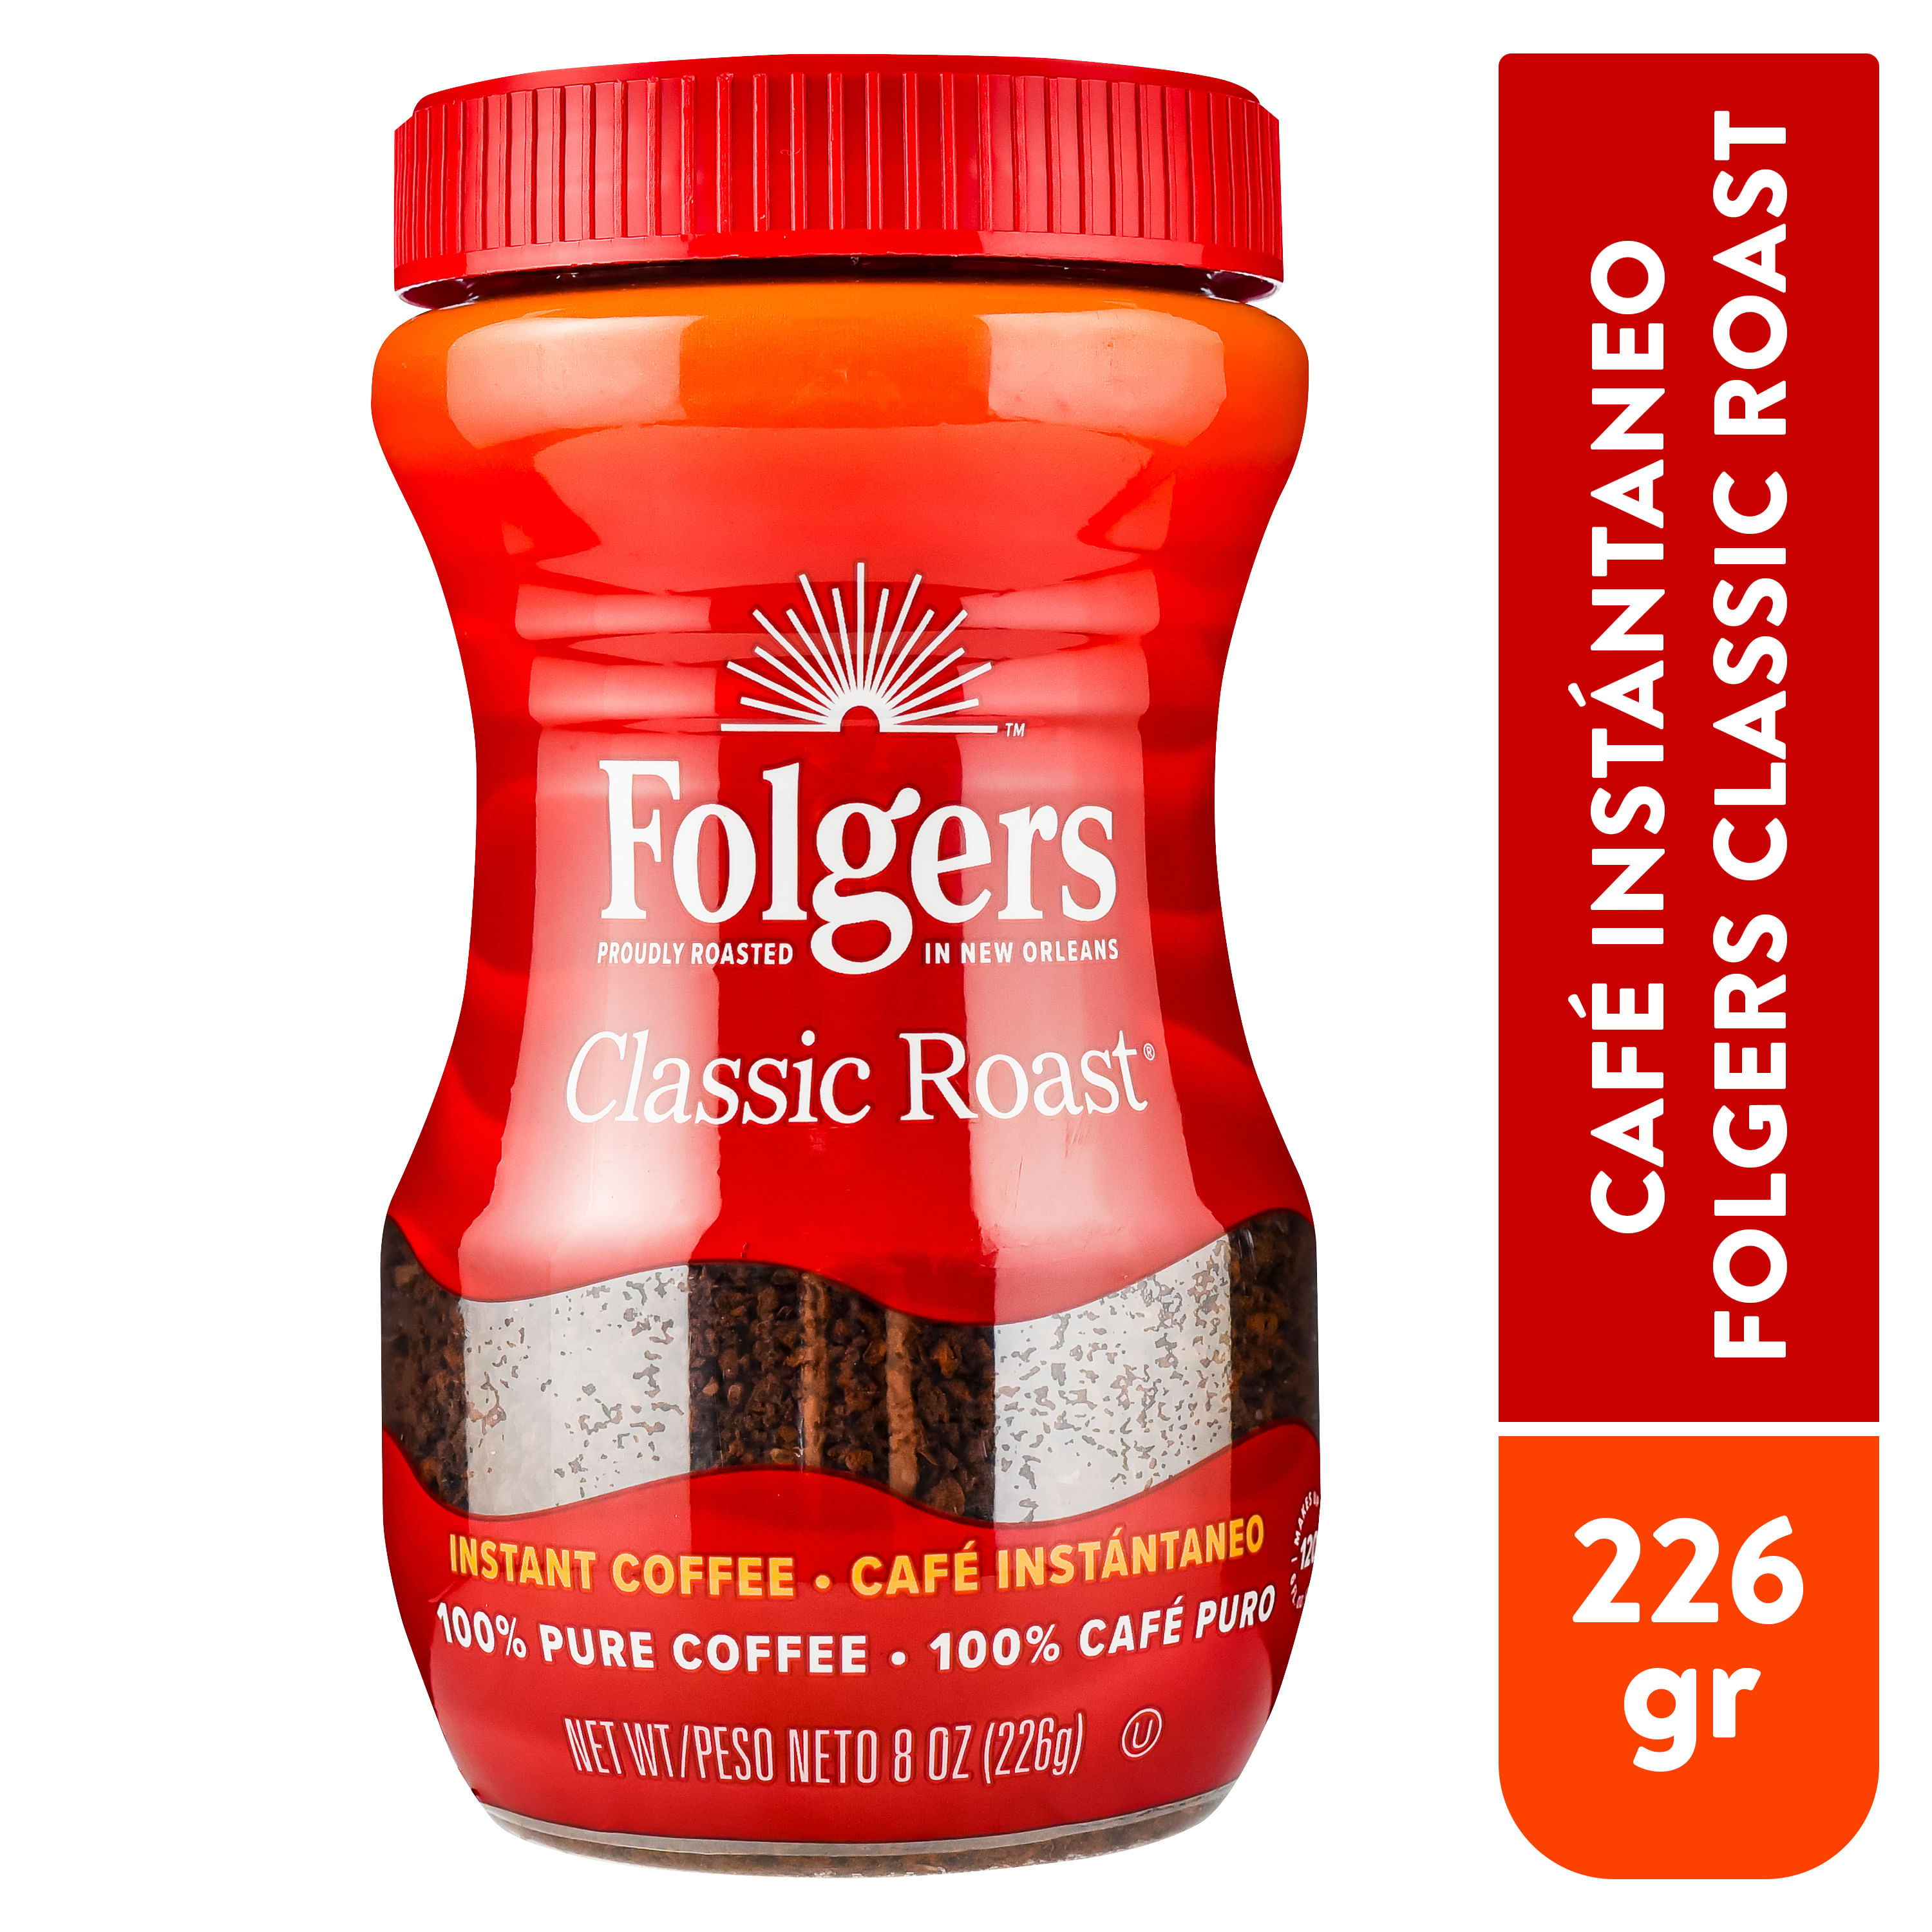 Caf-Folgers-Instantaneo-227g-1-13485